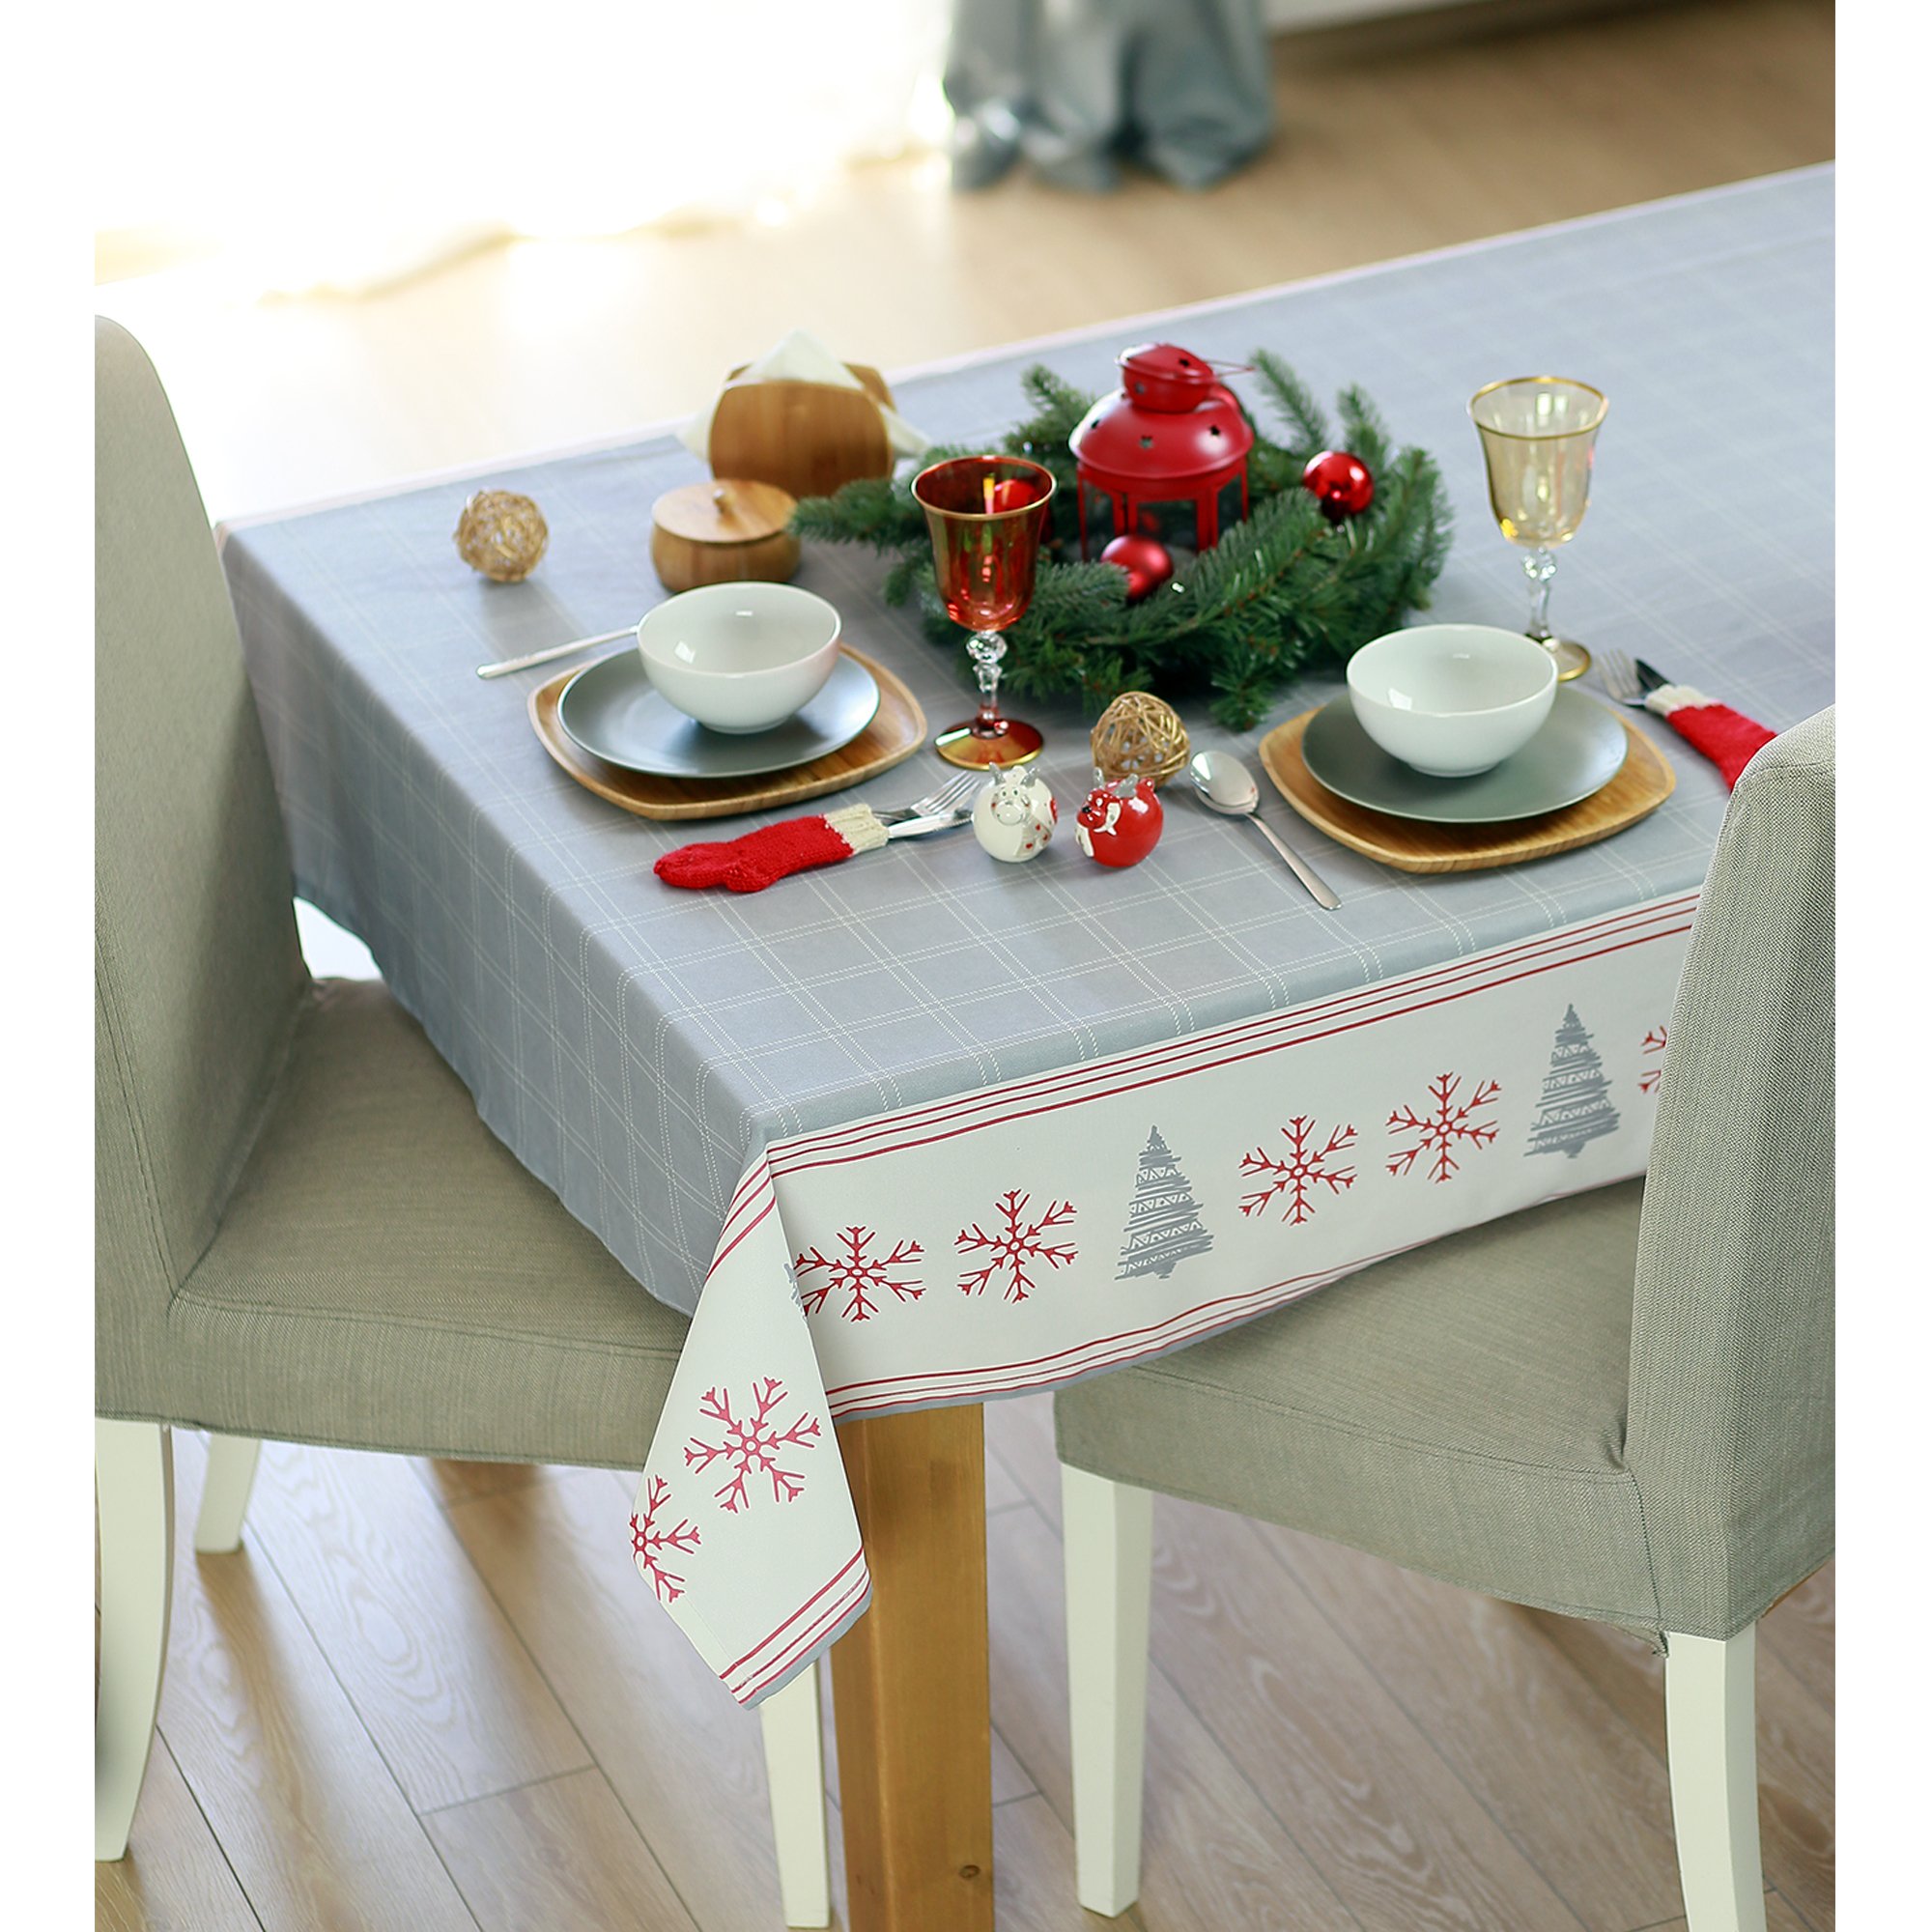 55" Merry Christmas Printed Square Tablecloth in Grey